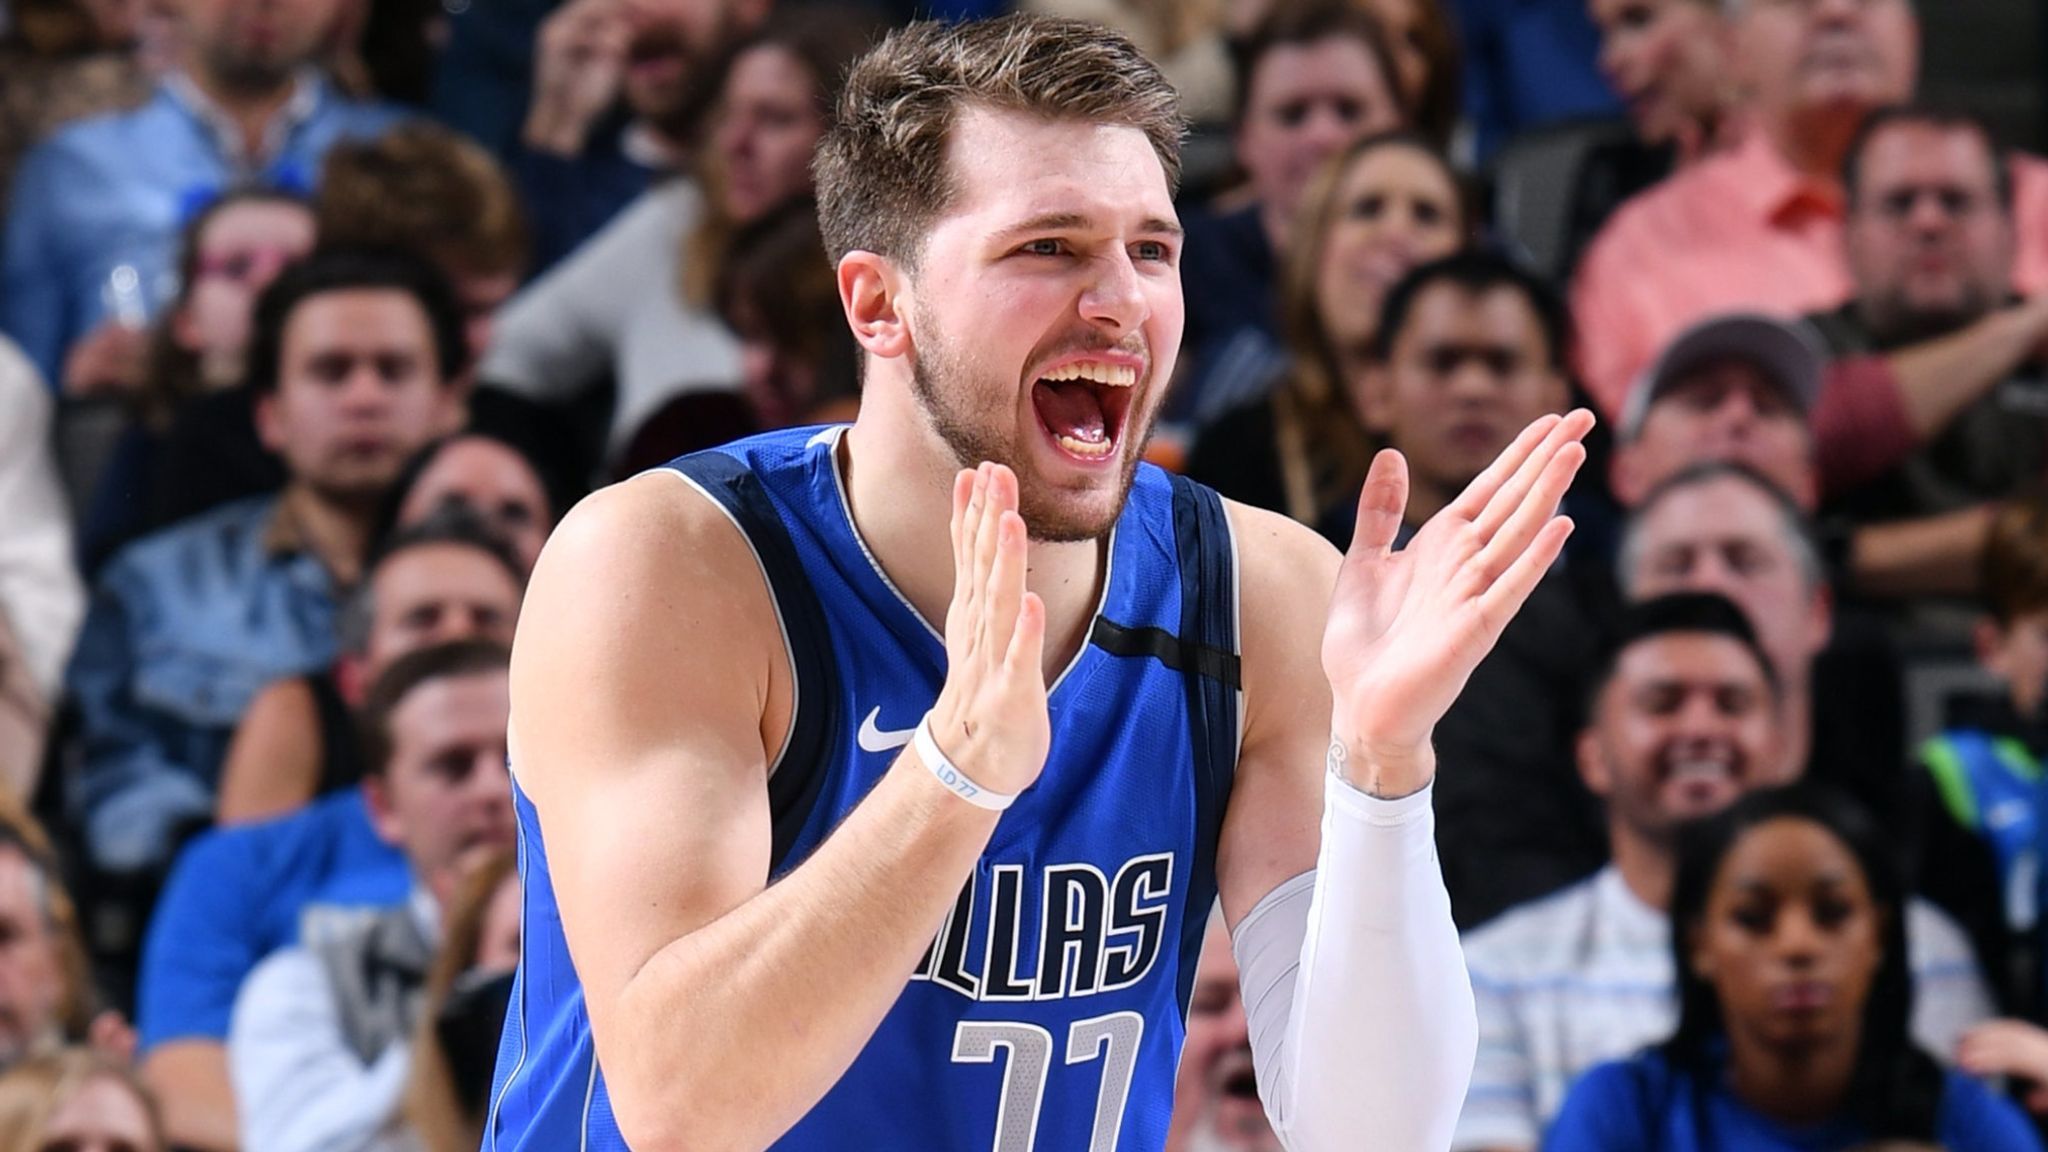 Watch: Luka Doncic rips jersey in half